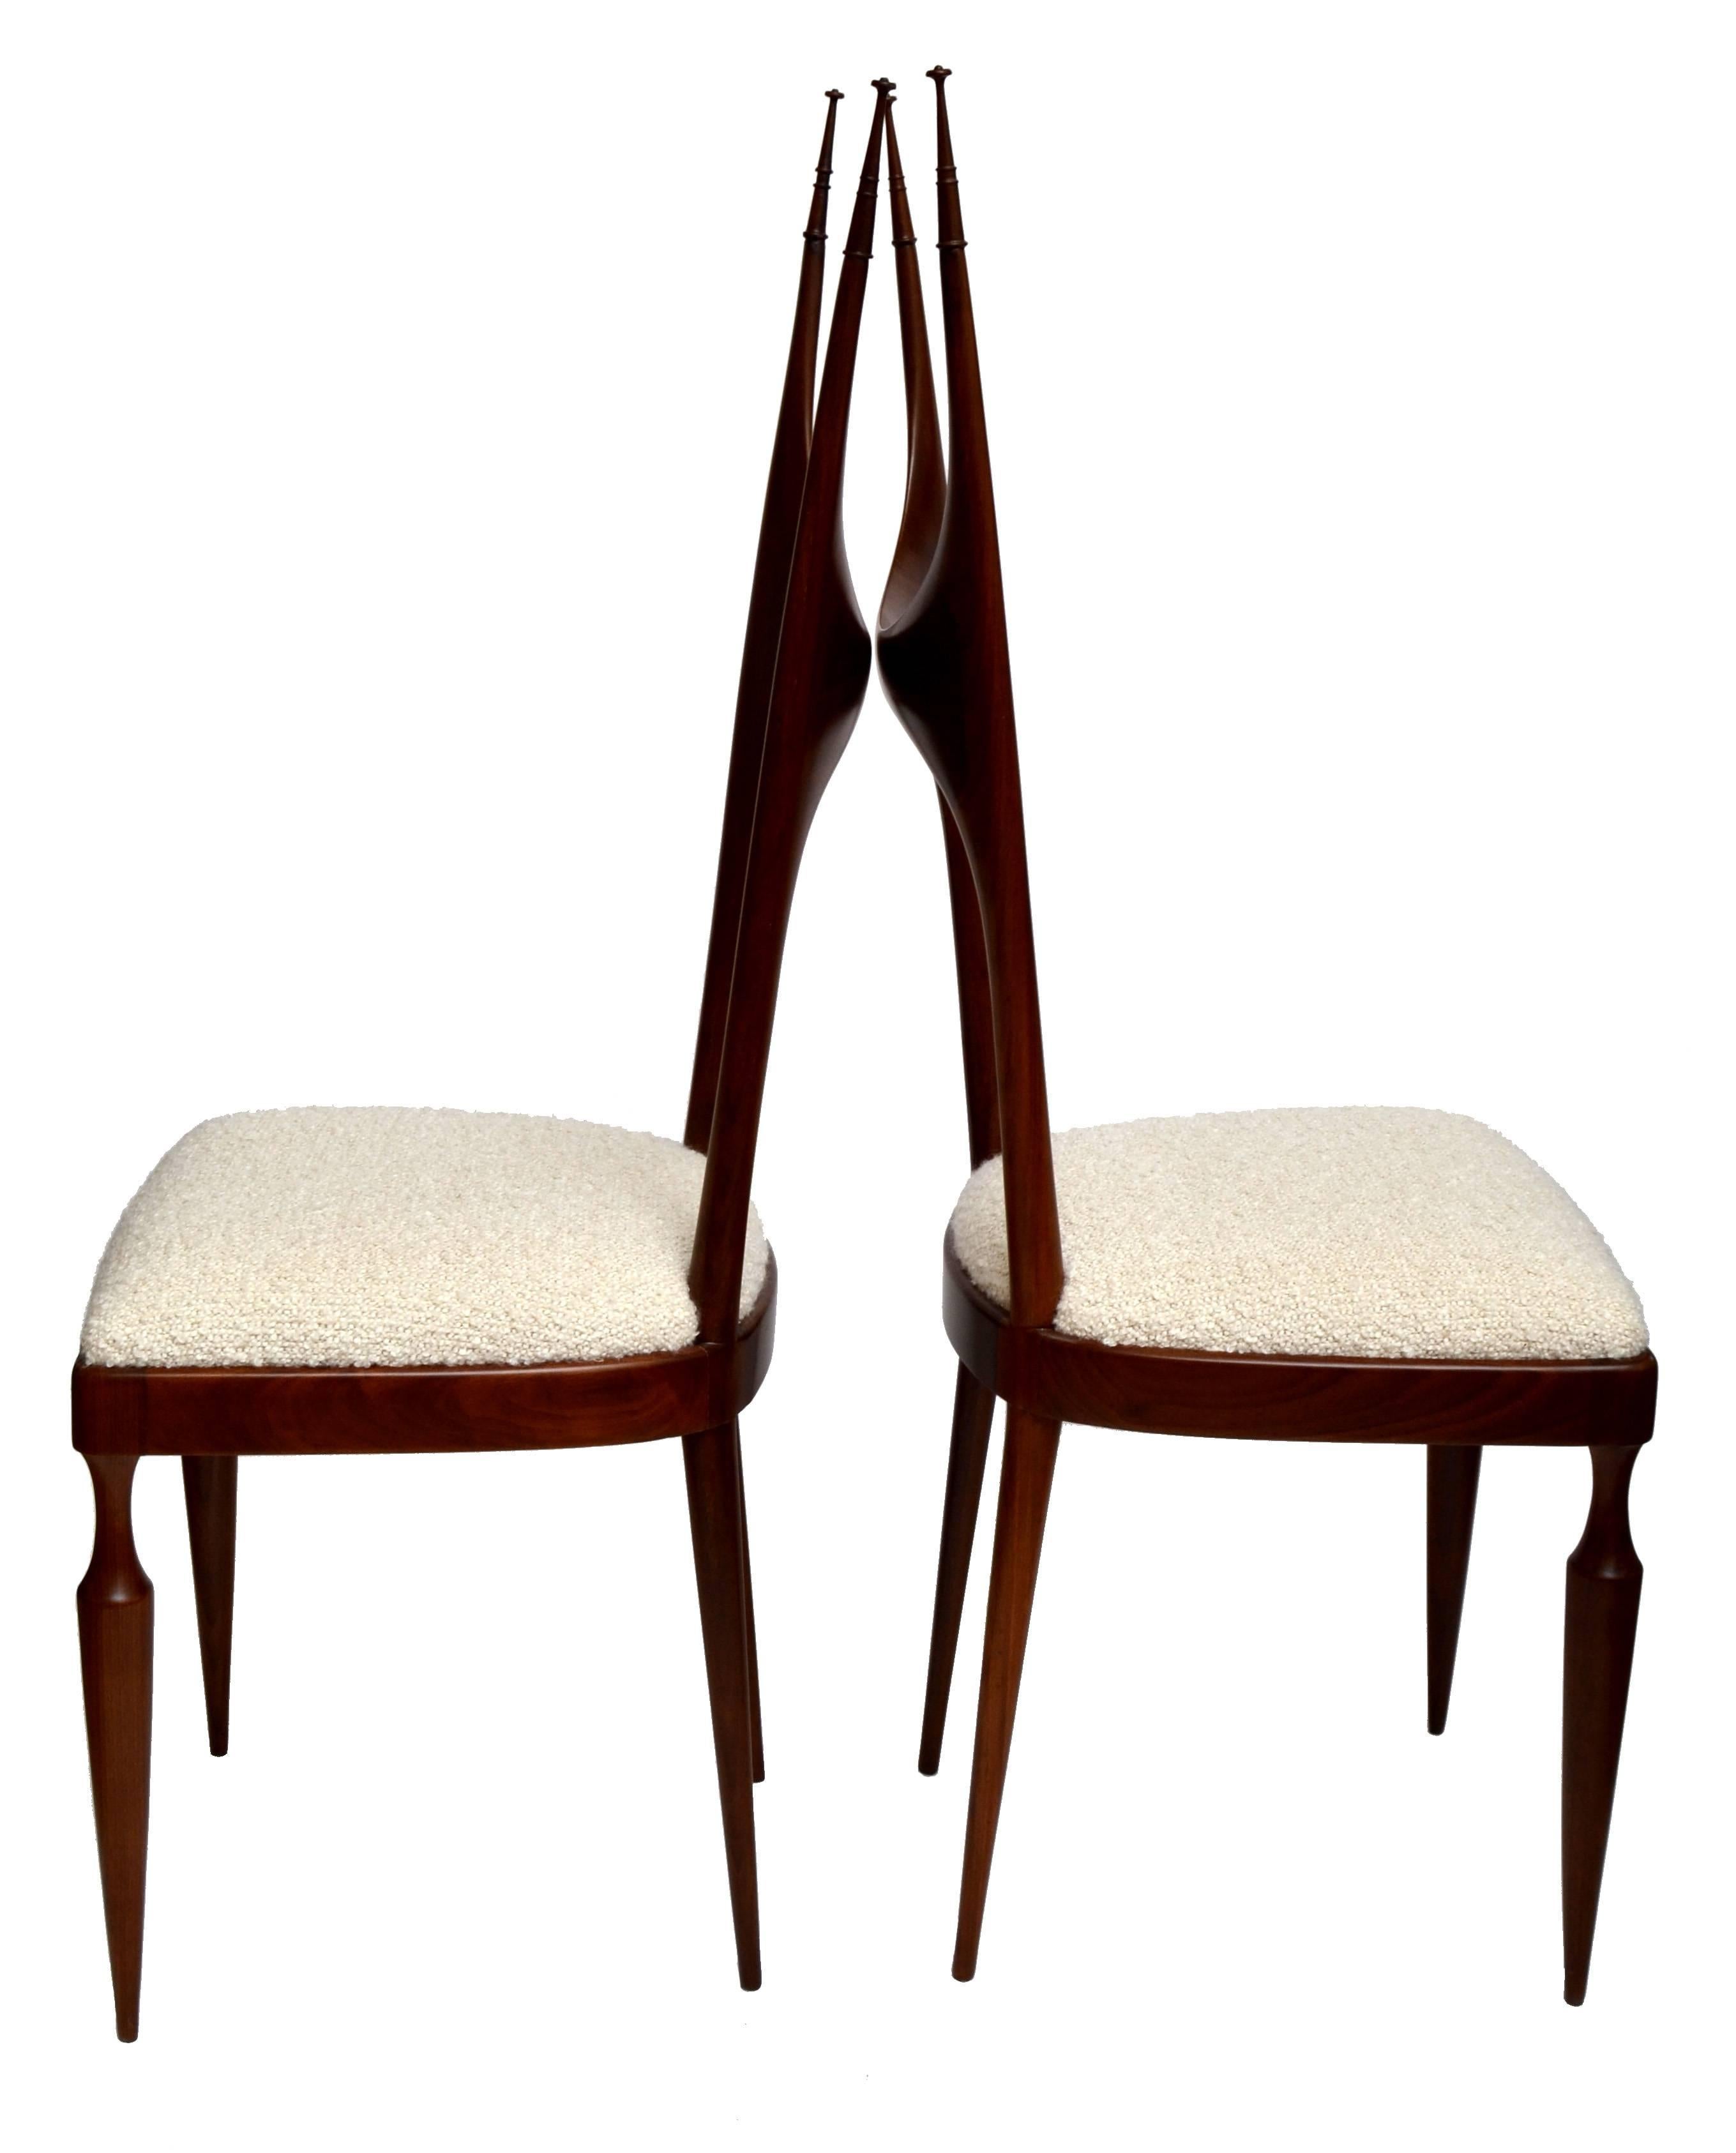 Unique Pozzi and Verga sculptural wooden chairs made in Italy, circa 1950.
The pair is new upholstered, firm and save to sit on.

         